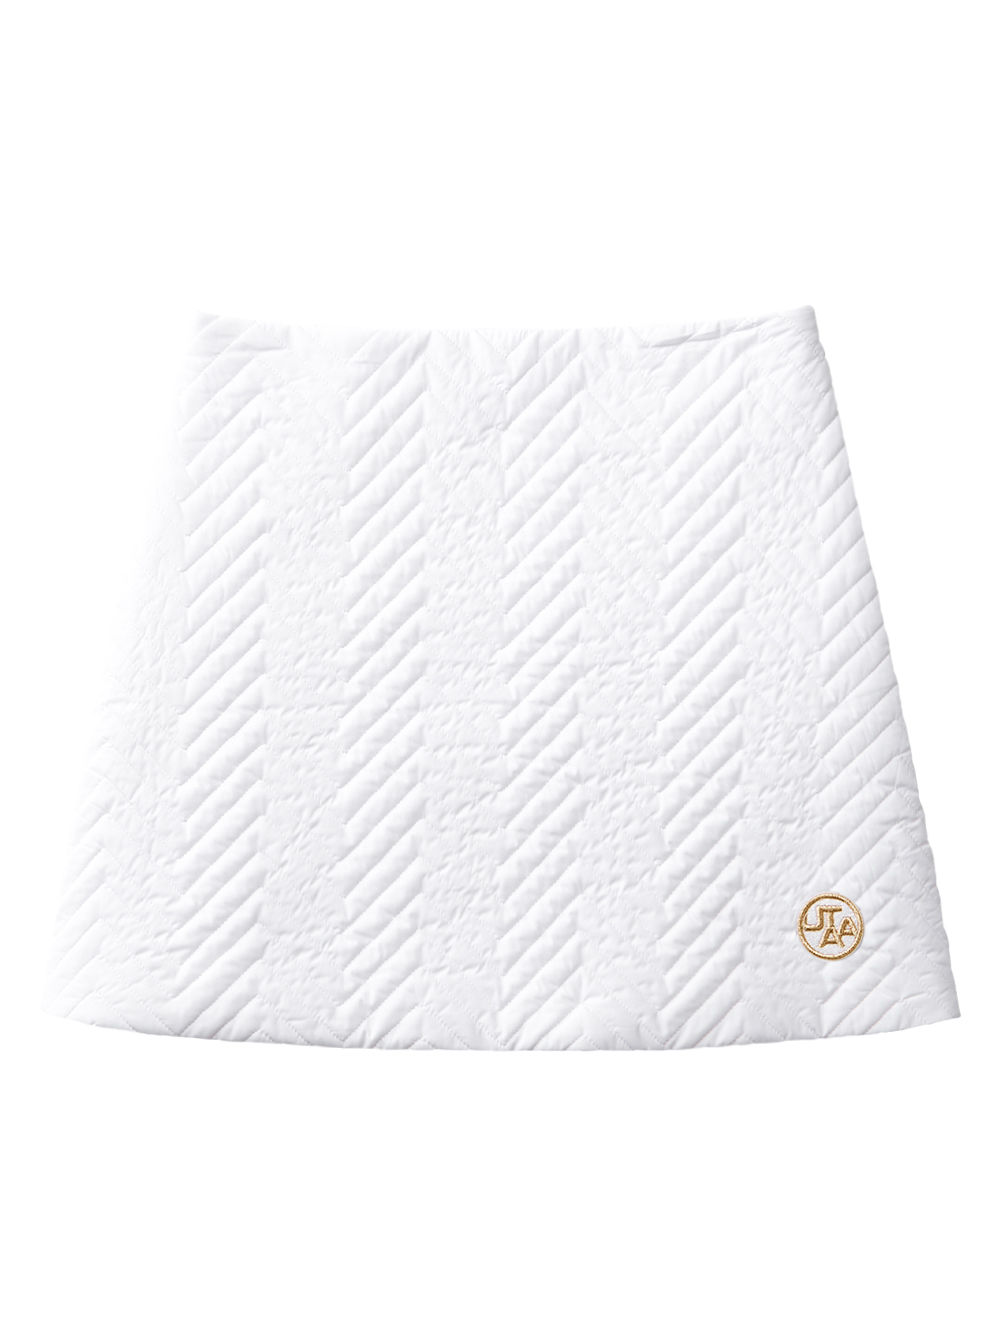 UTAA Golden Scales Quilting Padding Skirt  : White(UD1SKF593WH)